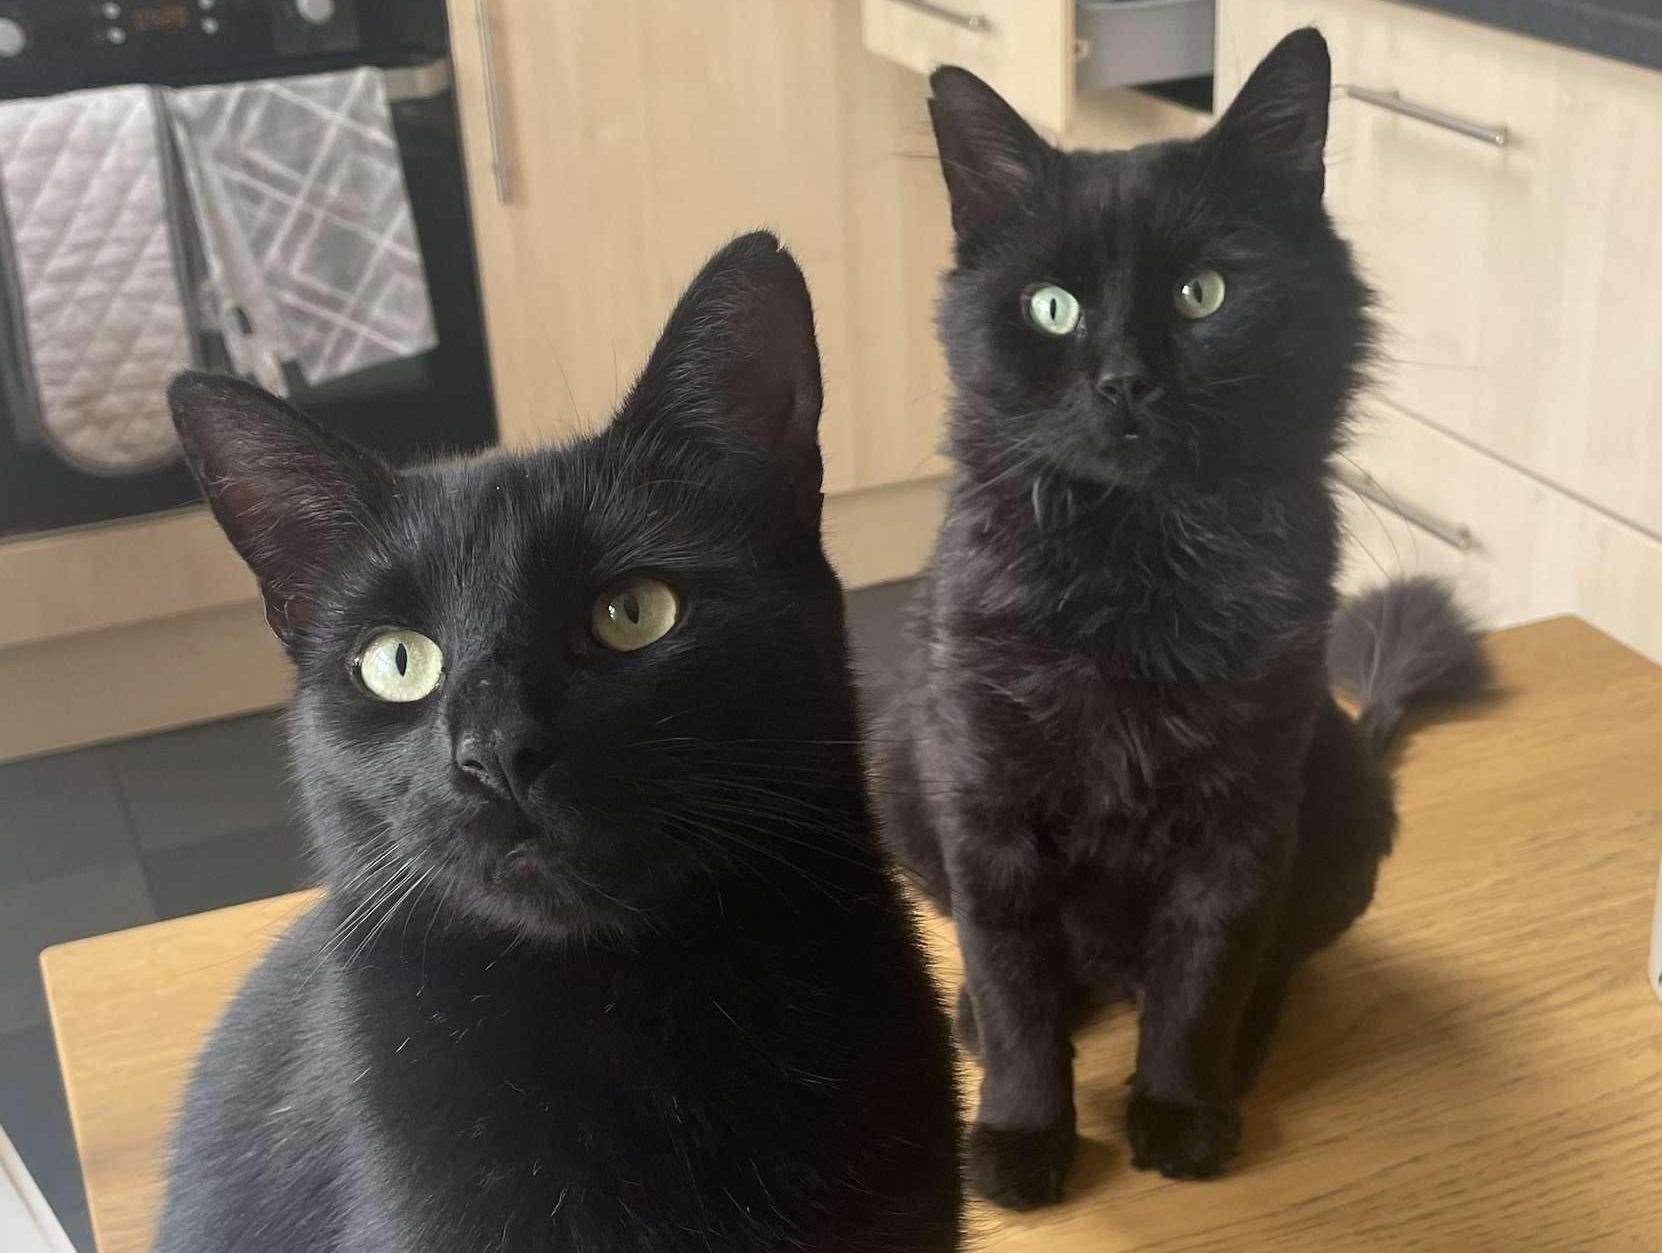 According to the RSPCA, it takes black cats more than three times longer to find homes than other cats